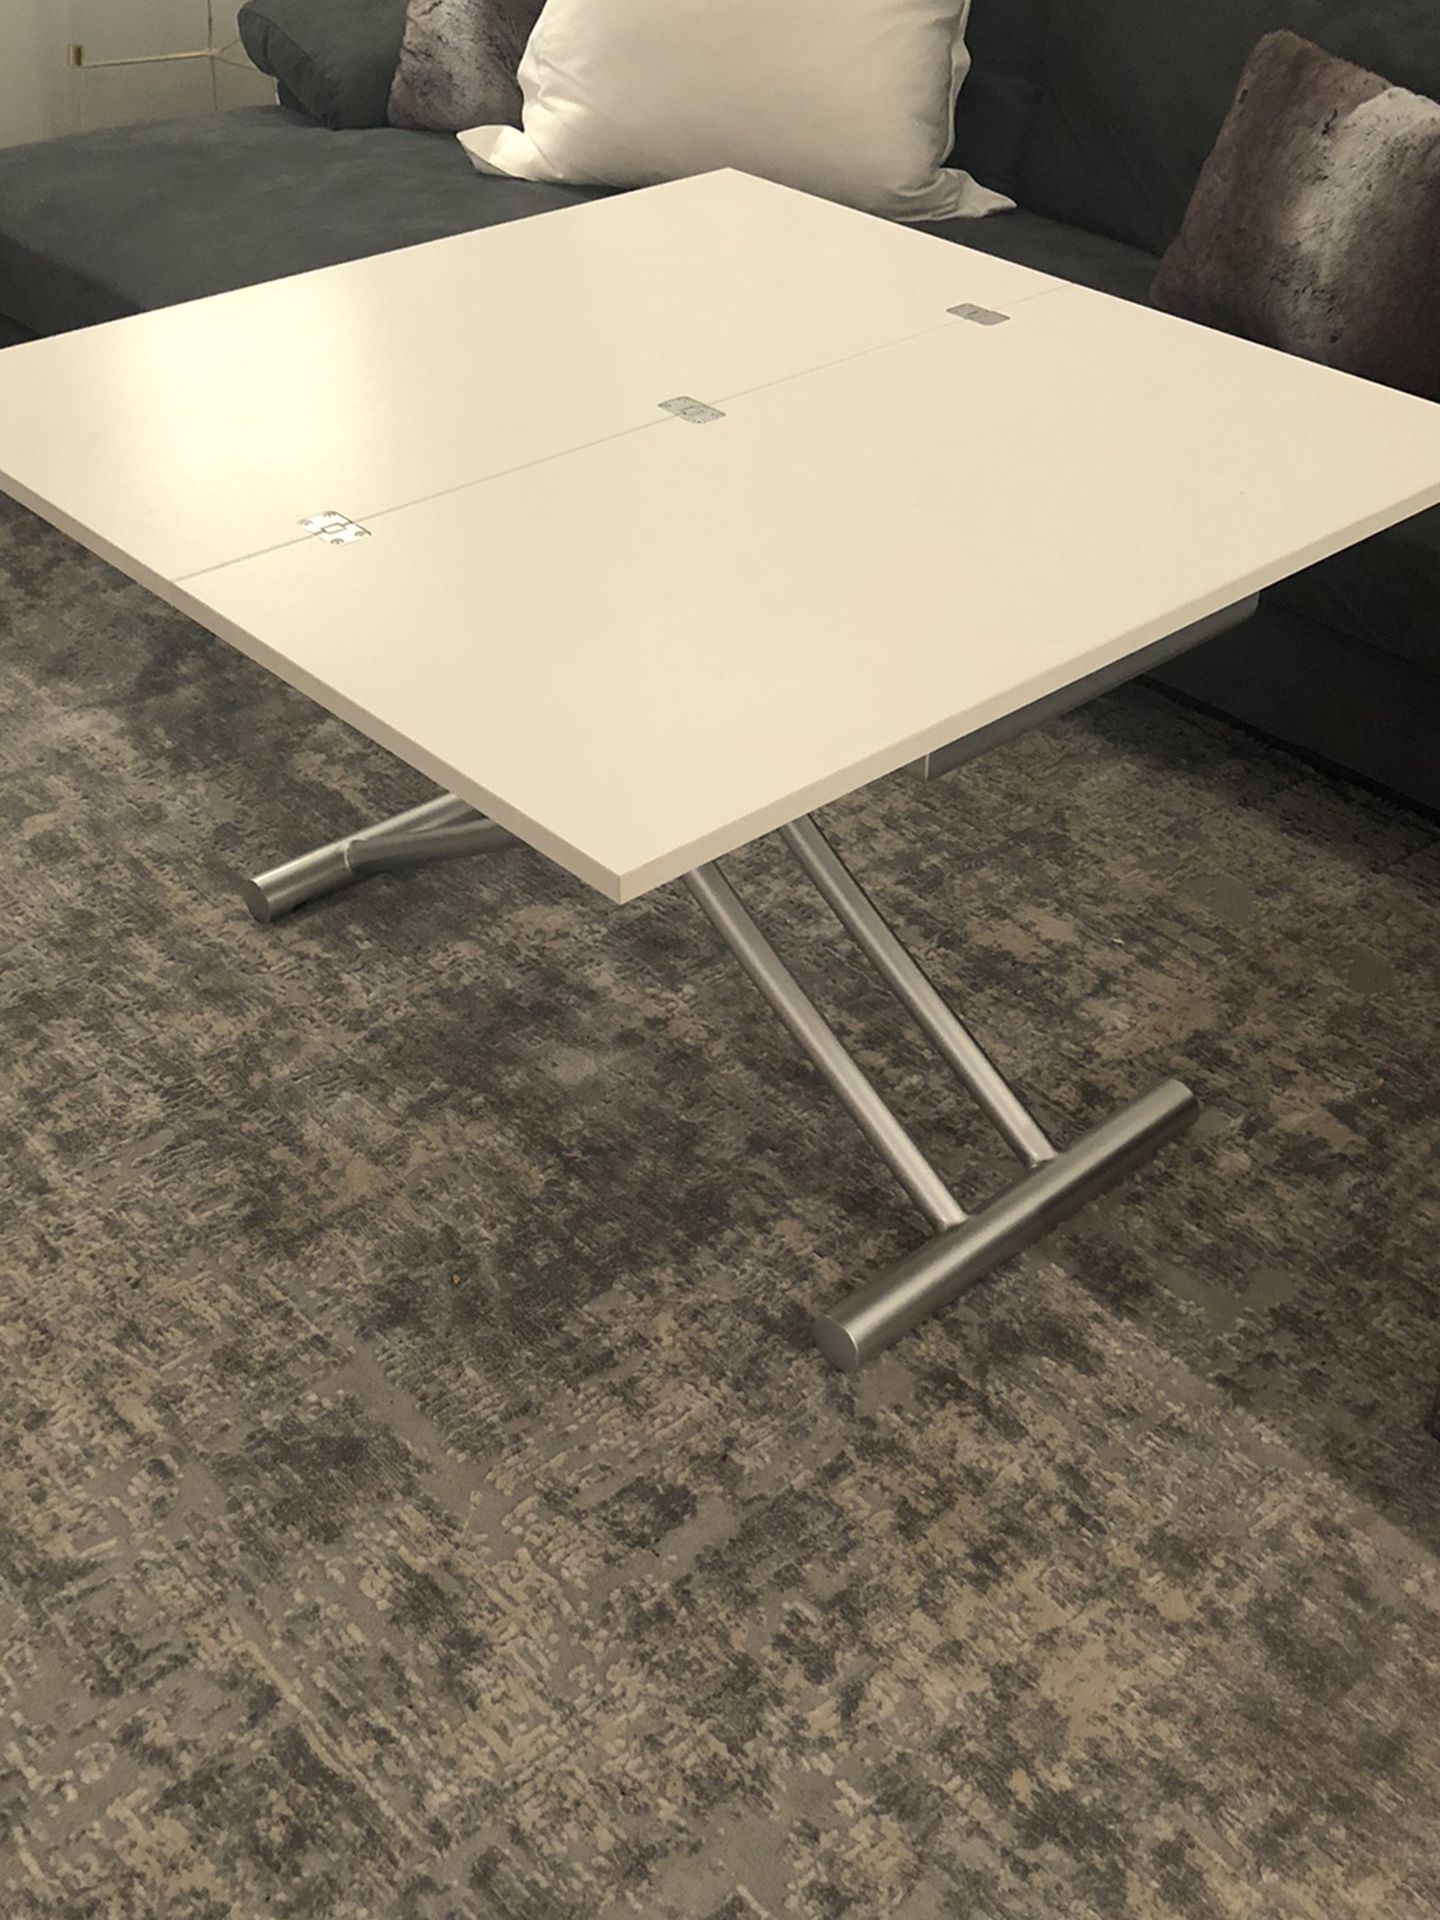 Amazing Adjustable Height And Size Table!!! Can Be A Dining Table, Desk And coffee Table!